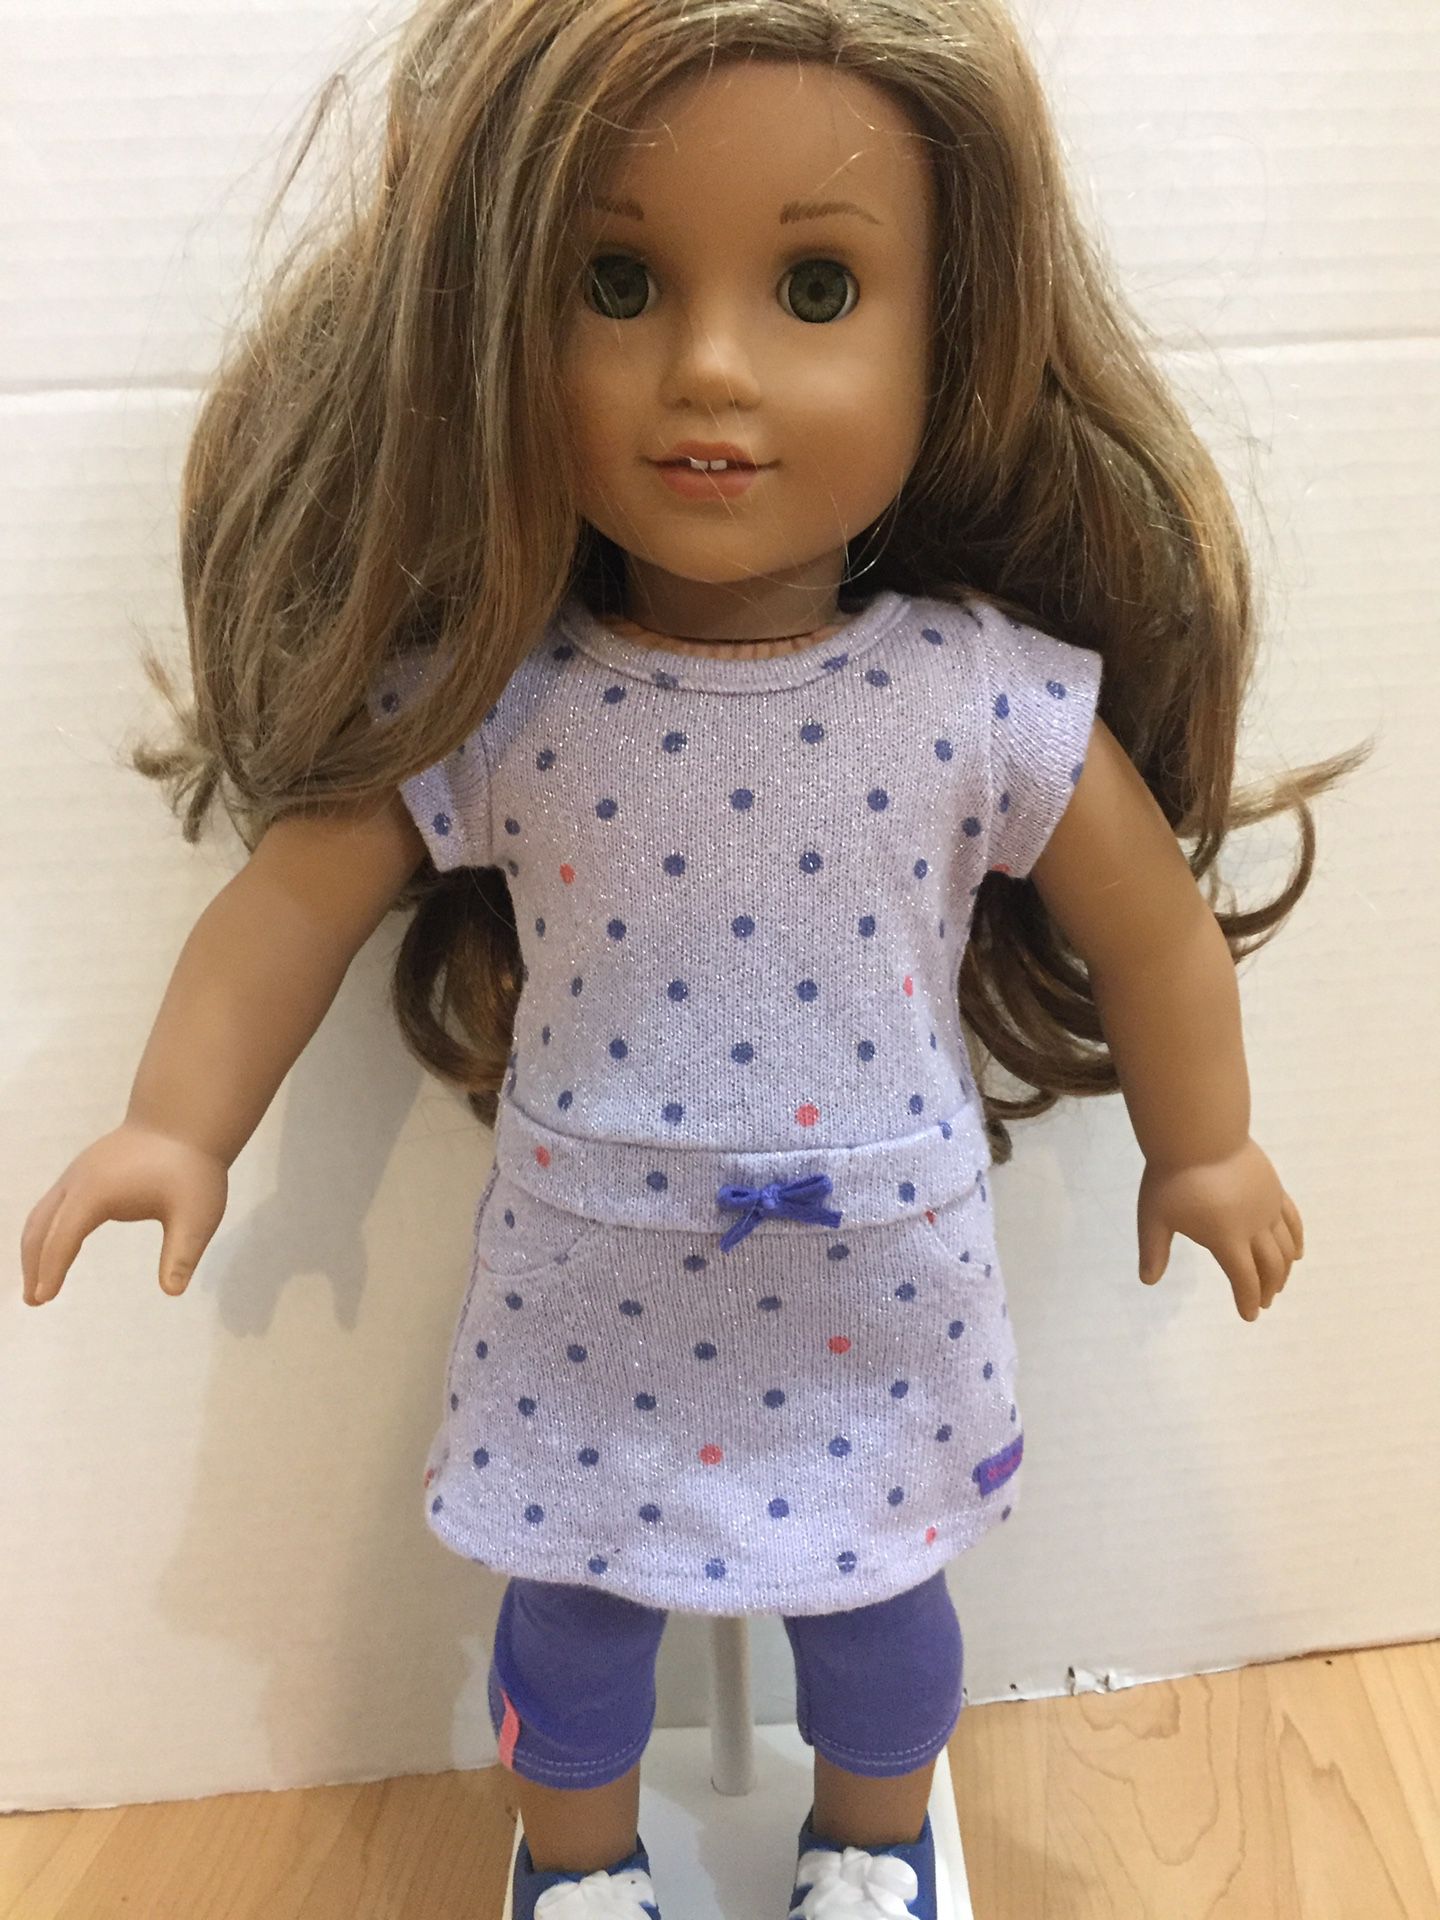 5 American Girl Doll Casual Outfits